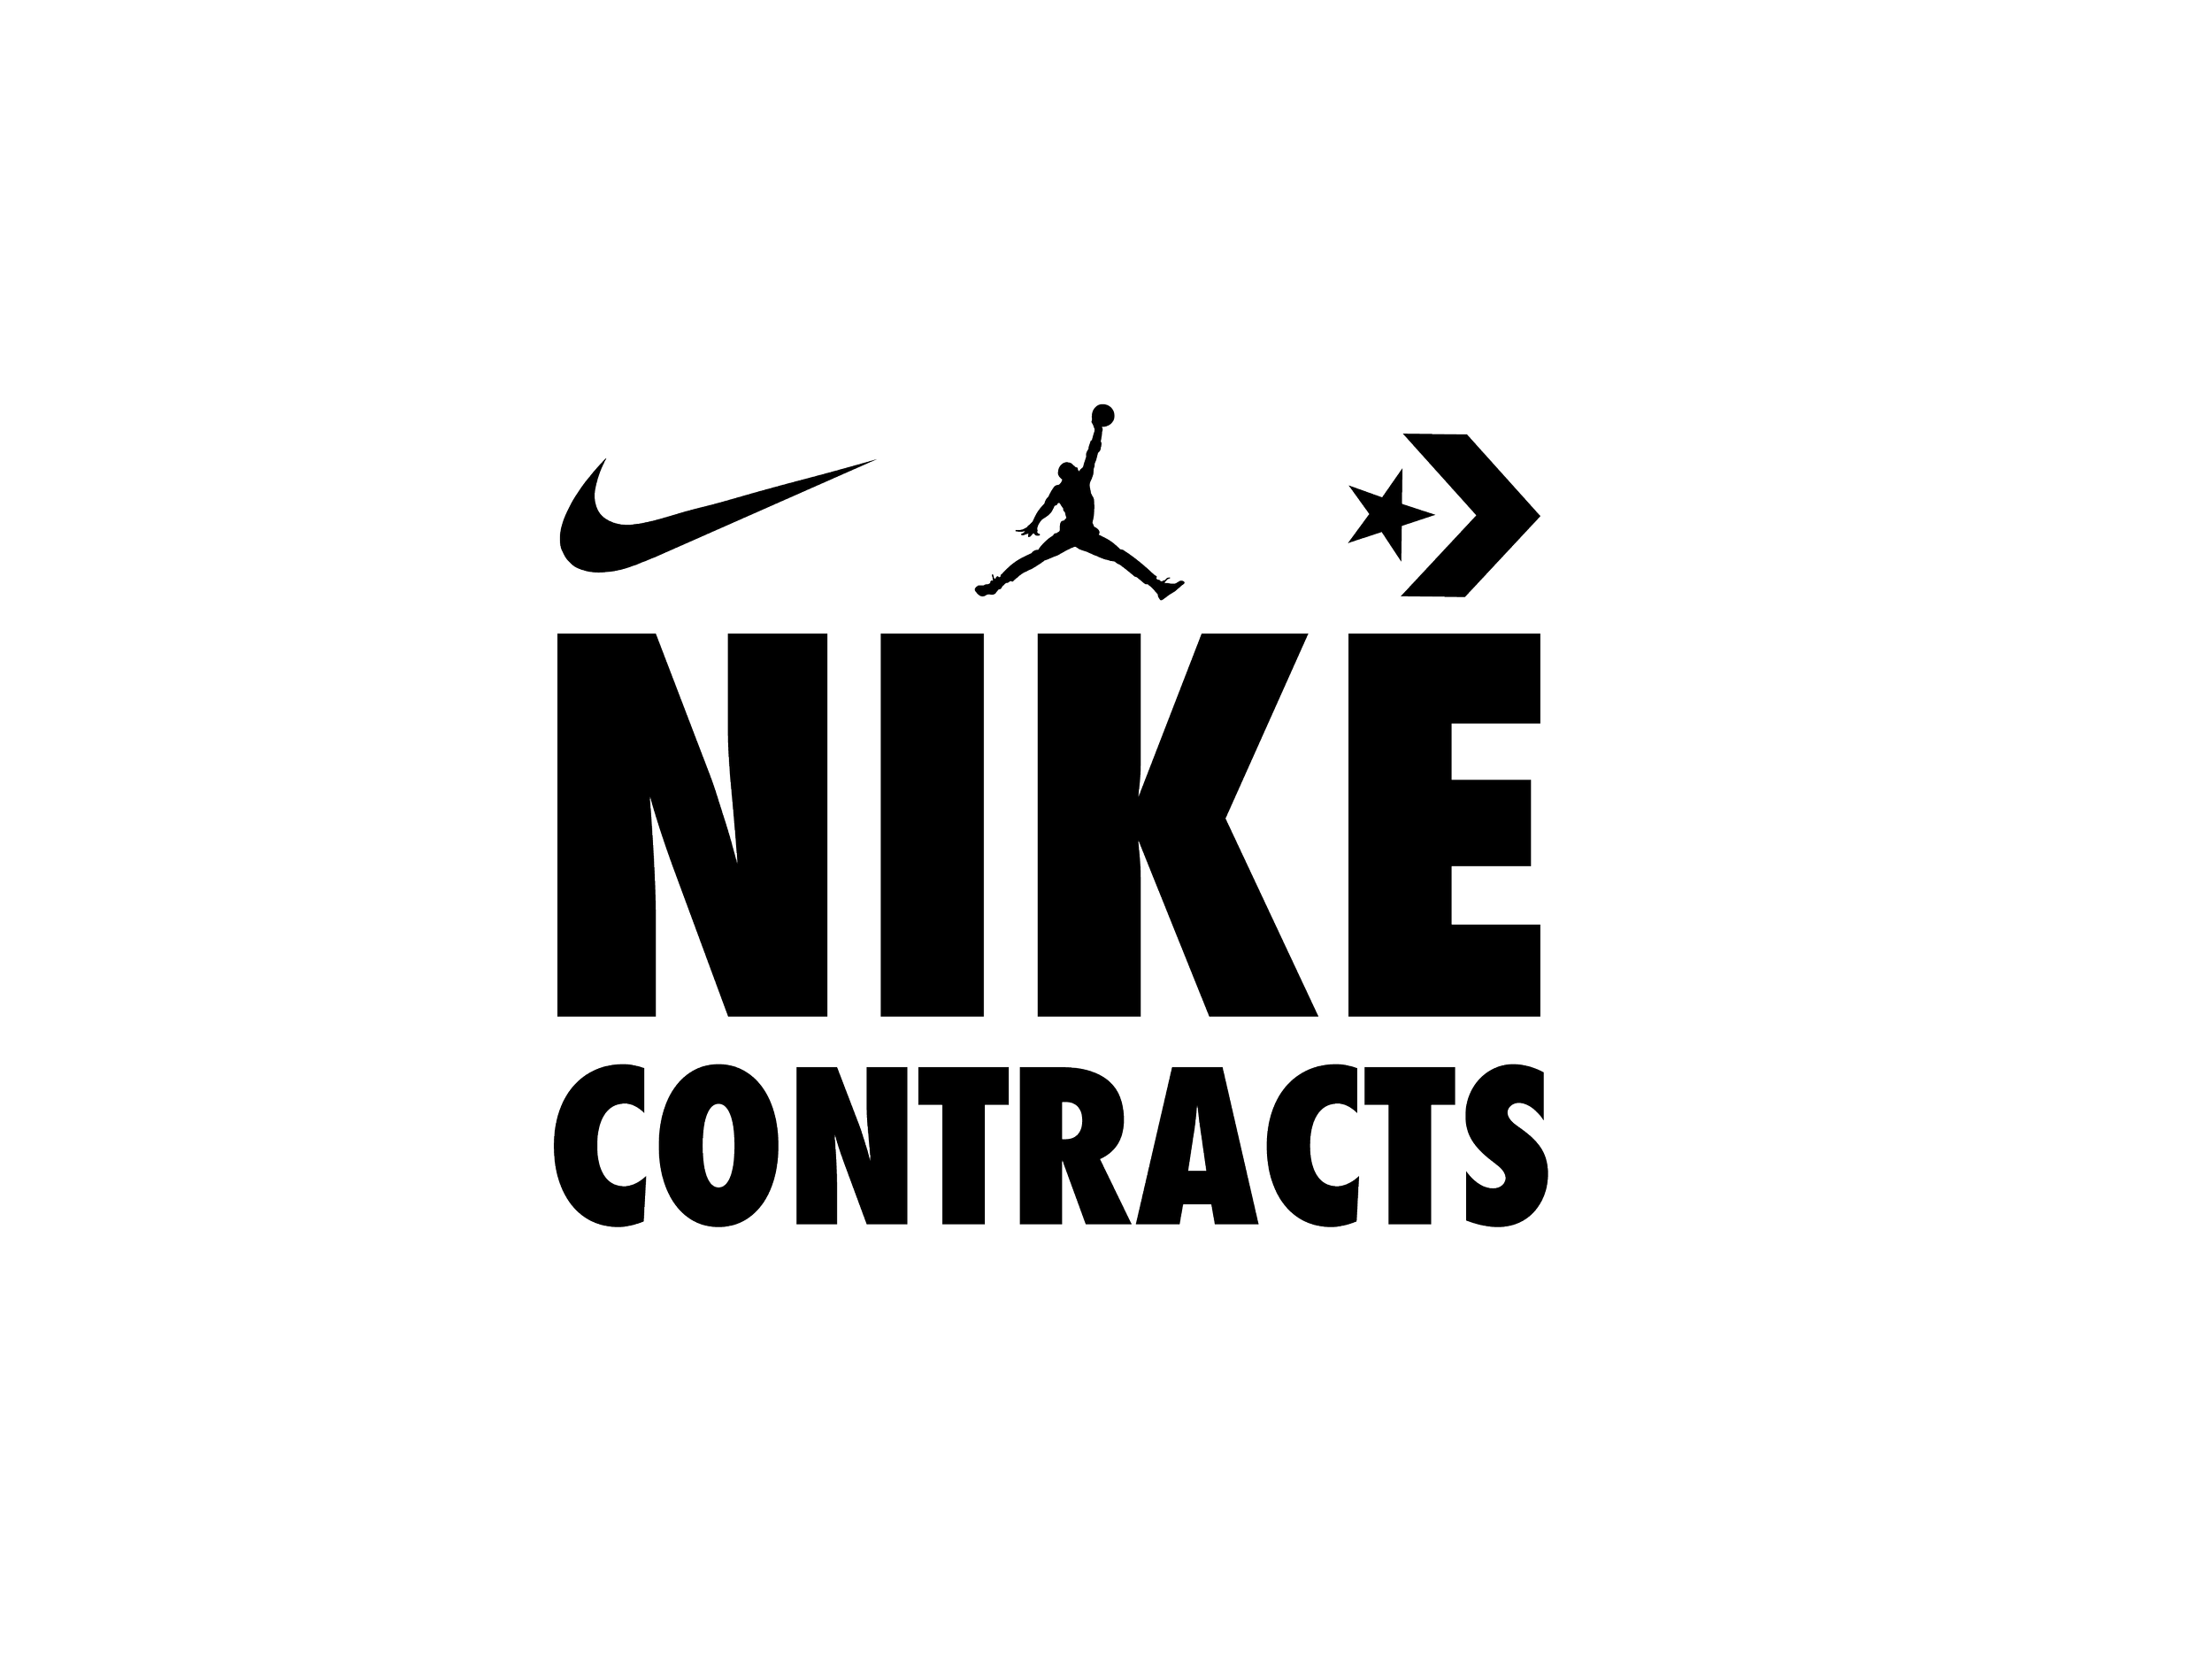 NIKEContracts_WordMark_r1-08.png